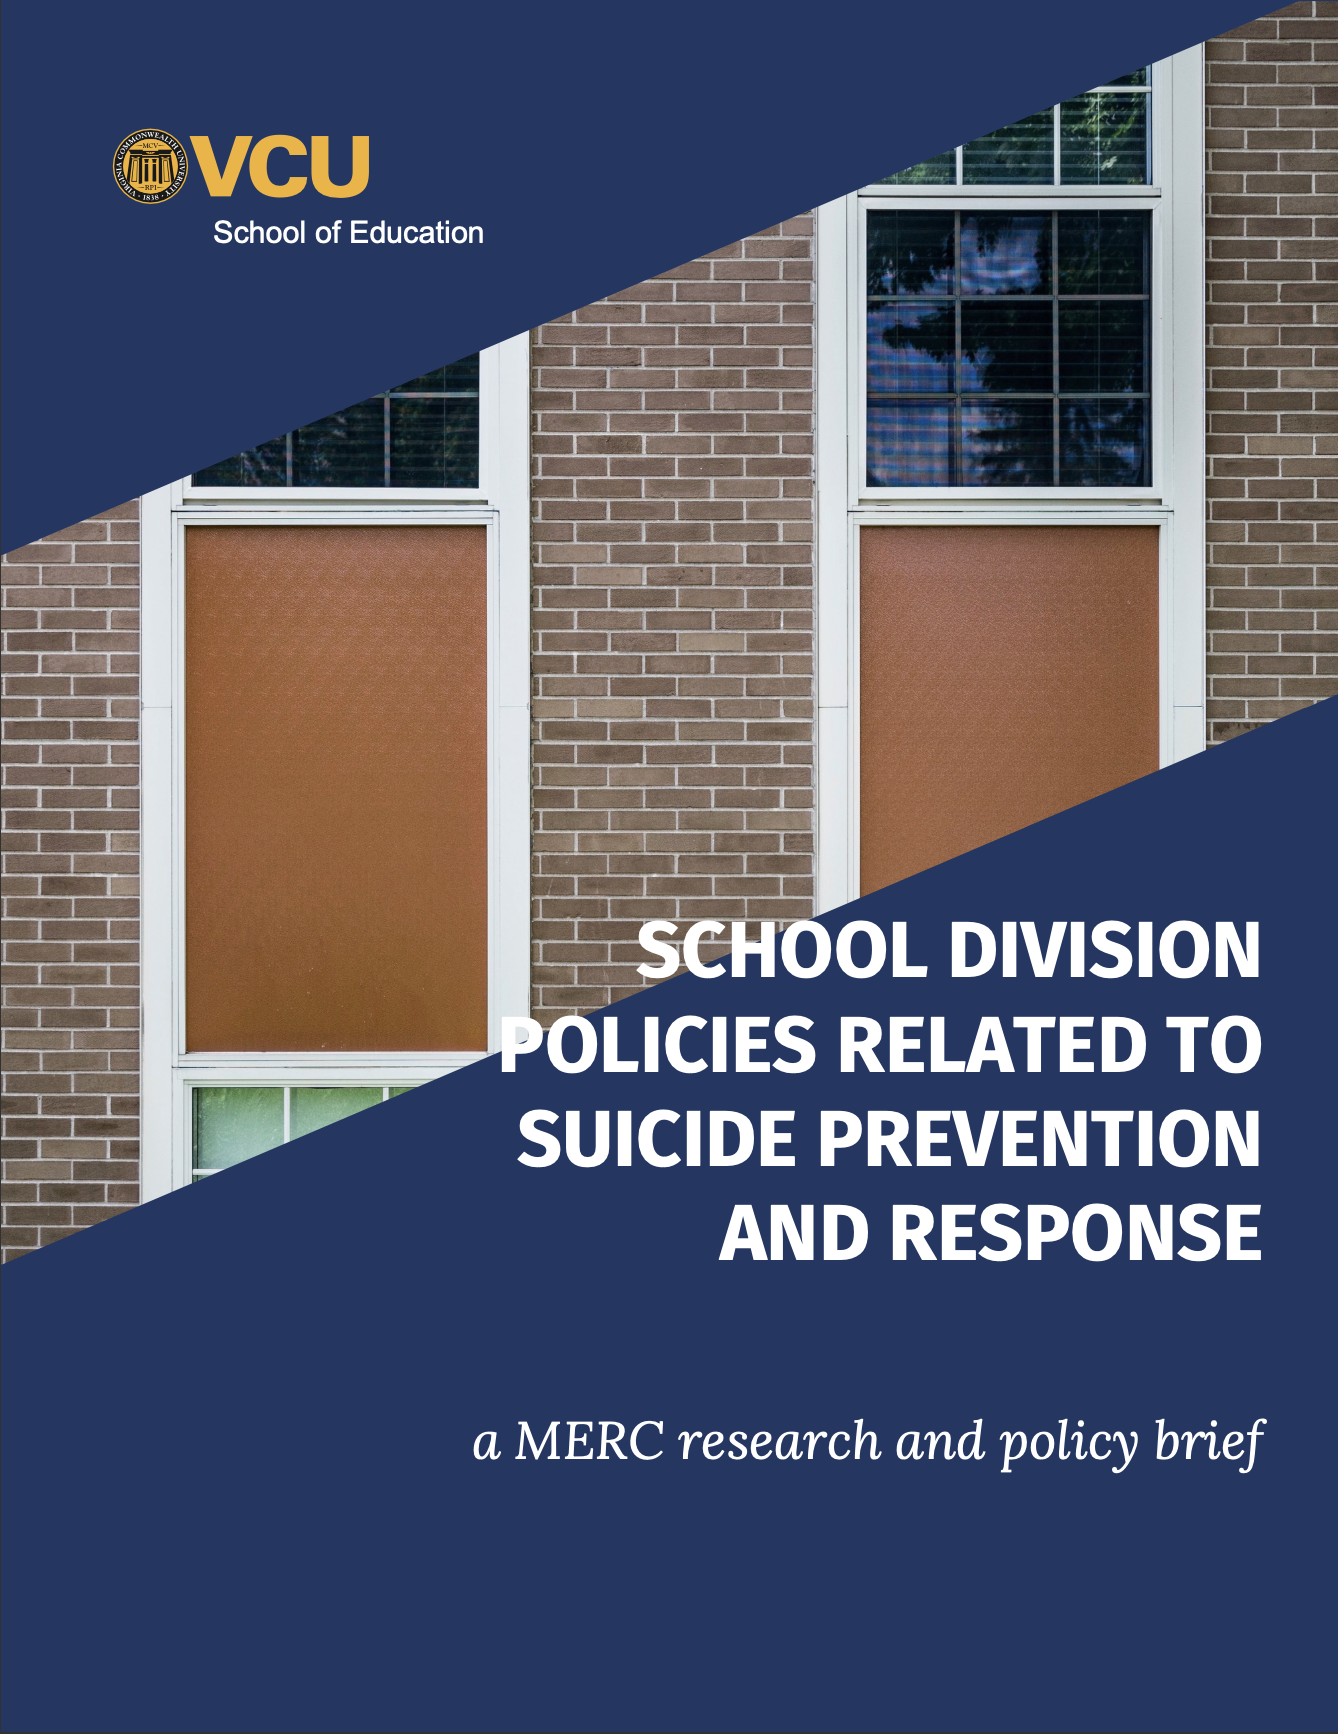 A research brief cover focused on suicide prevention in schools